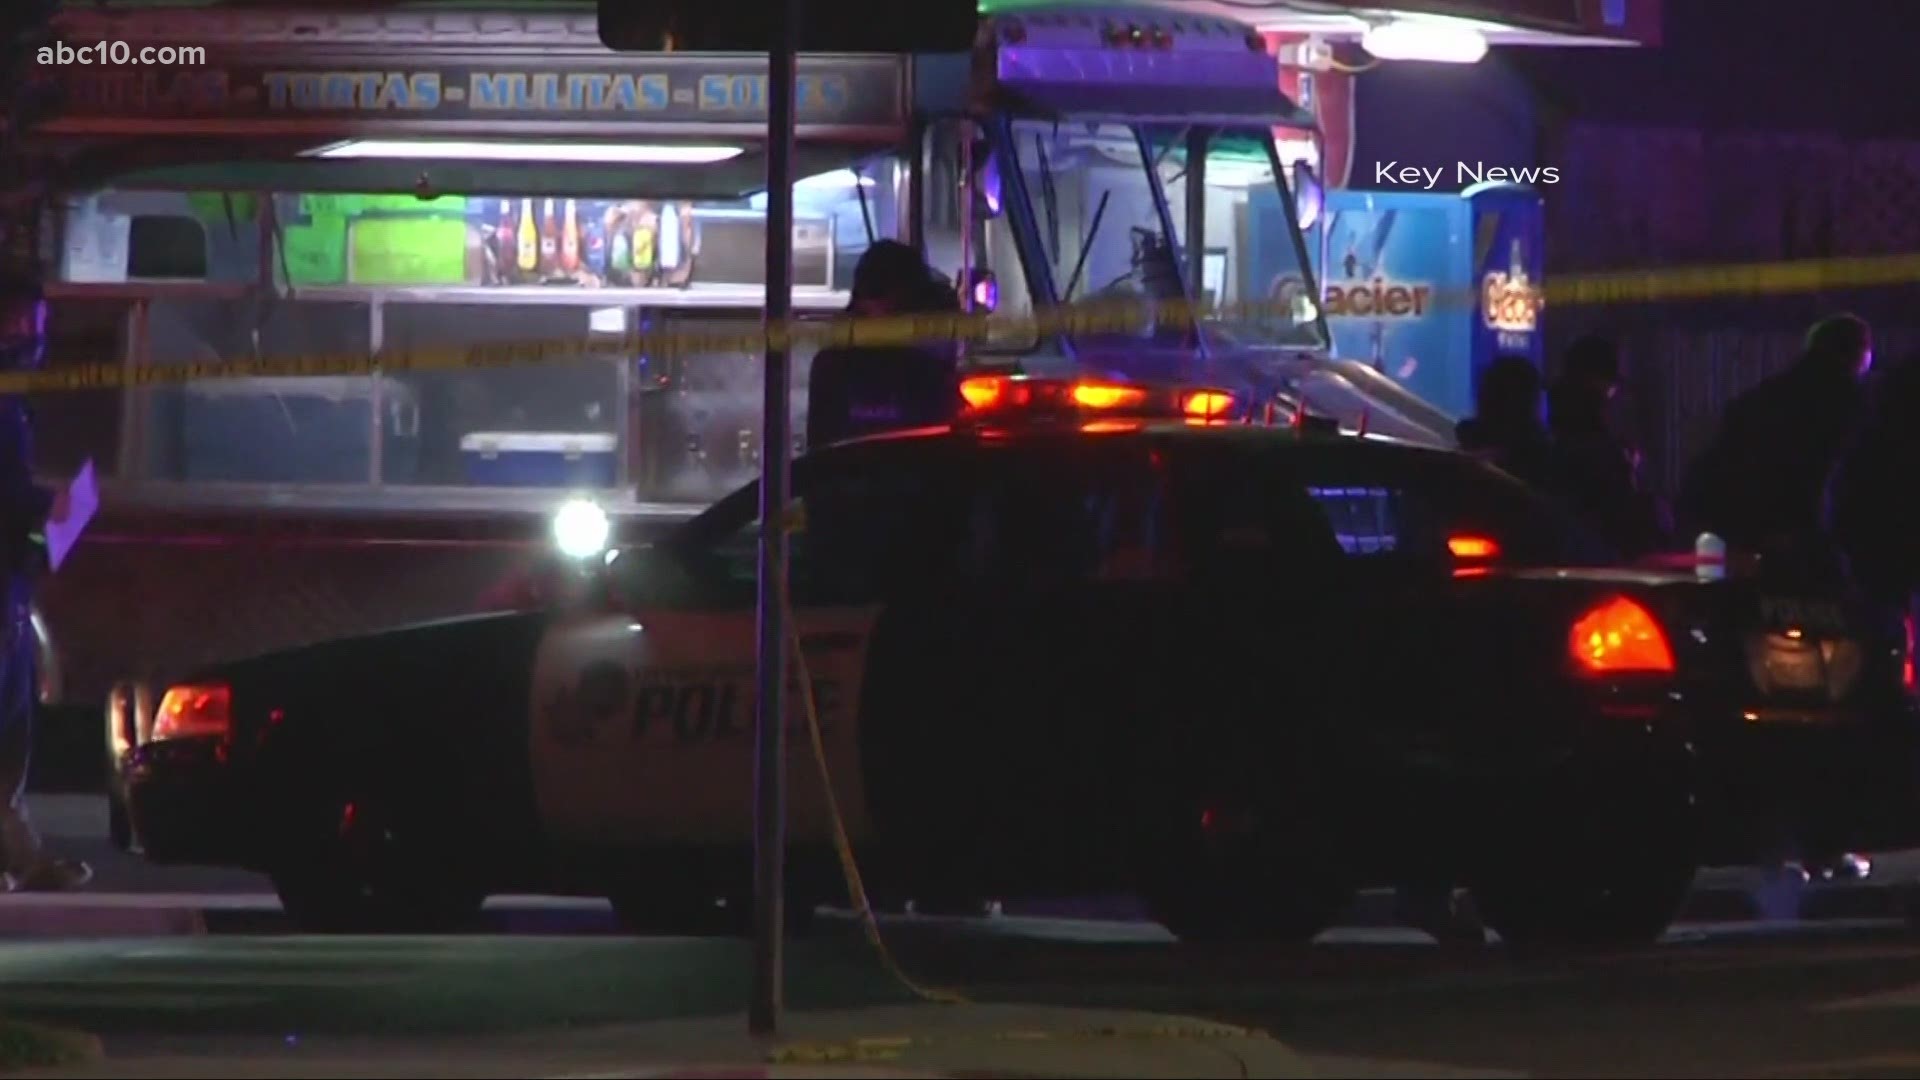 Police say the 13-year-old suspect walked up to the truck, shot the owner and then fled.